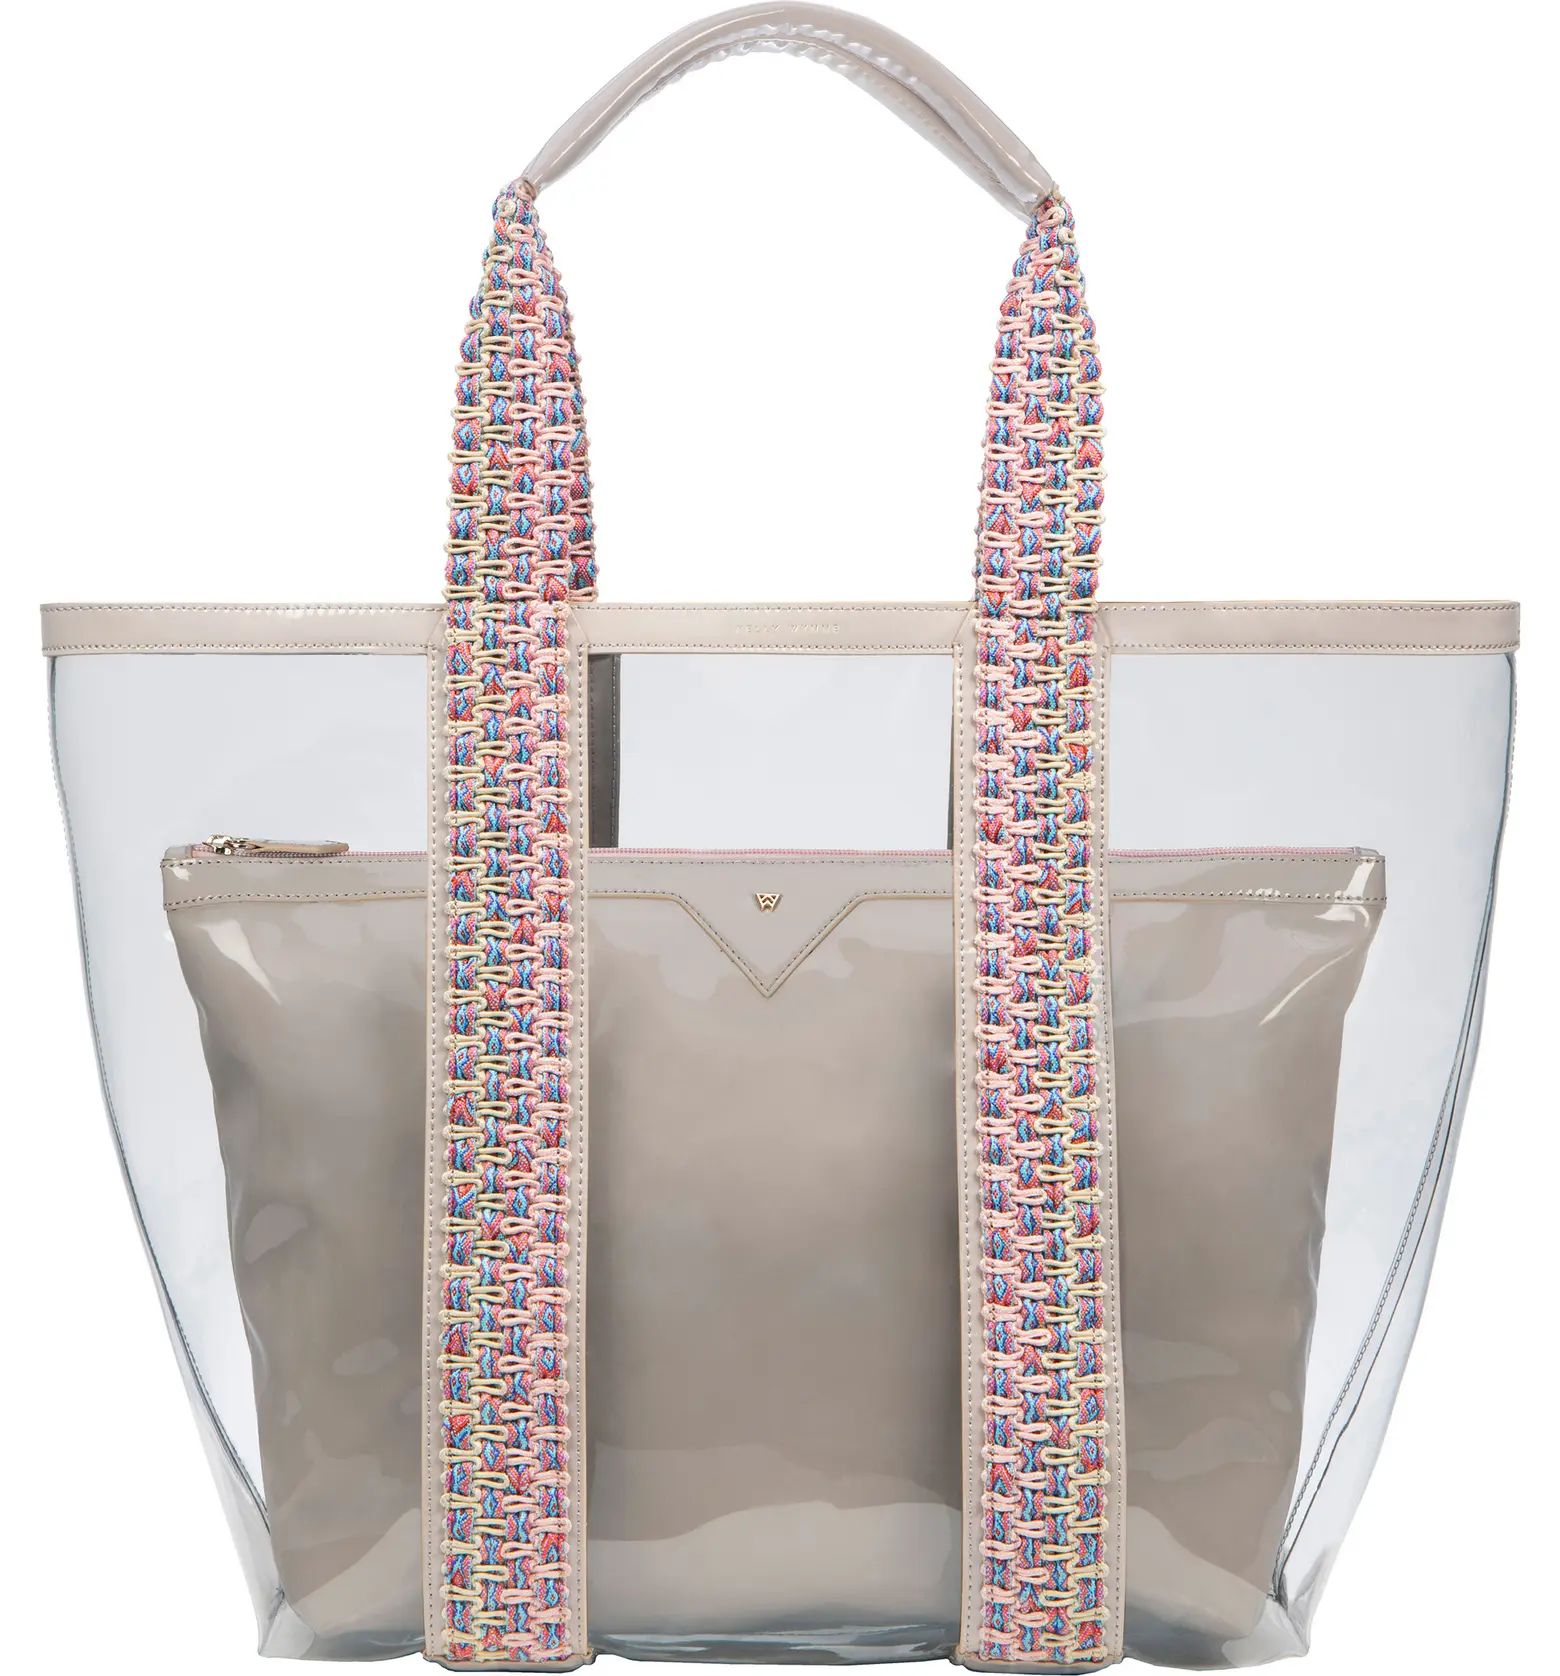 Bring on the Beach Clear Tote | Nordstrom